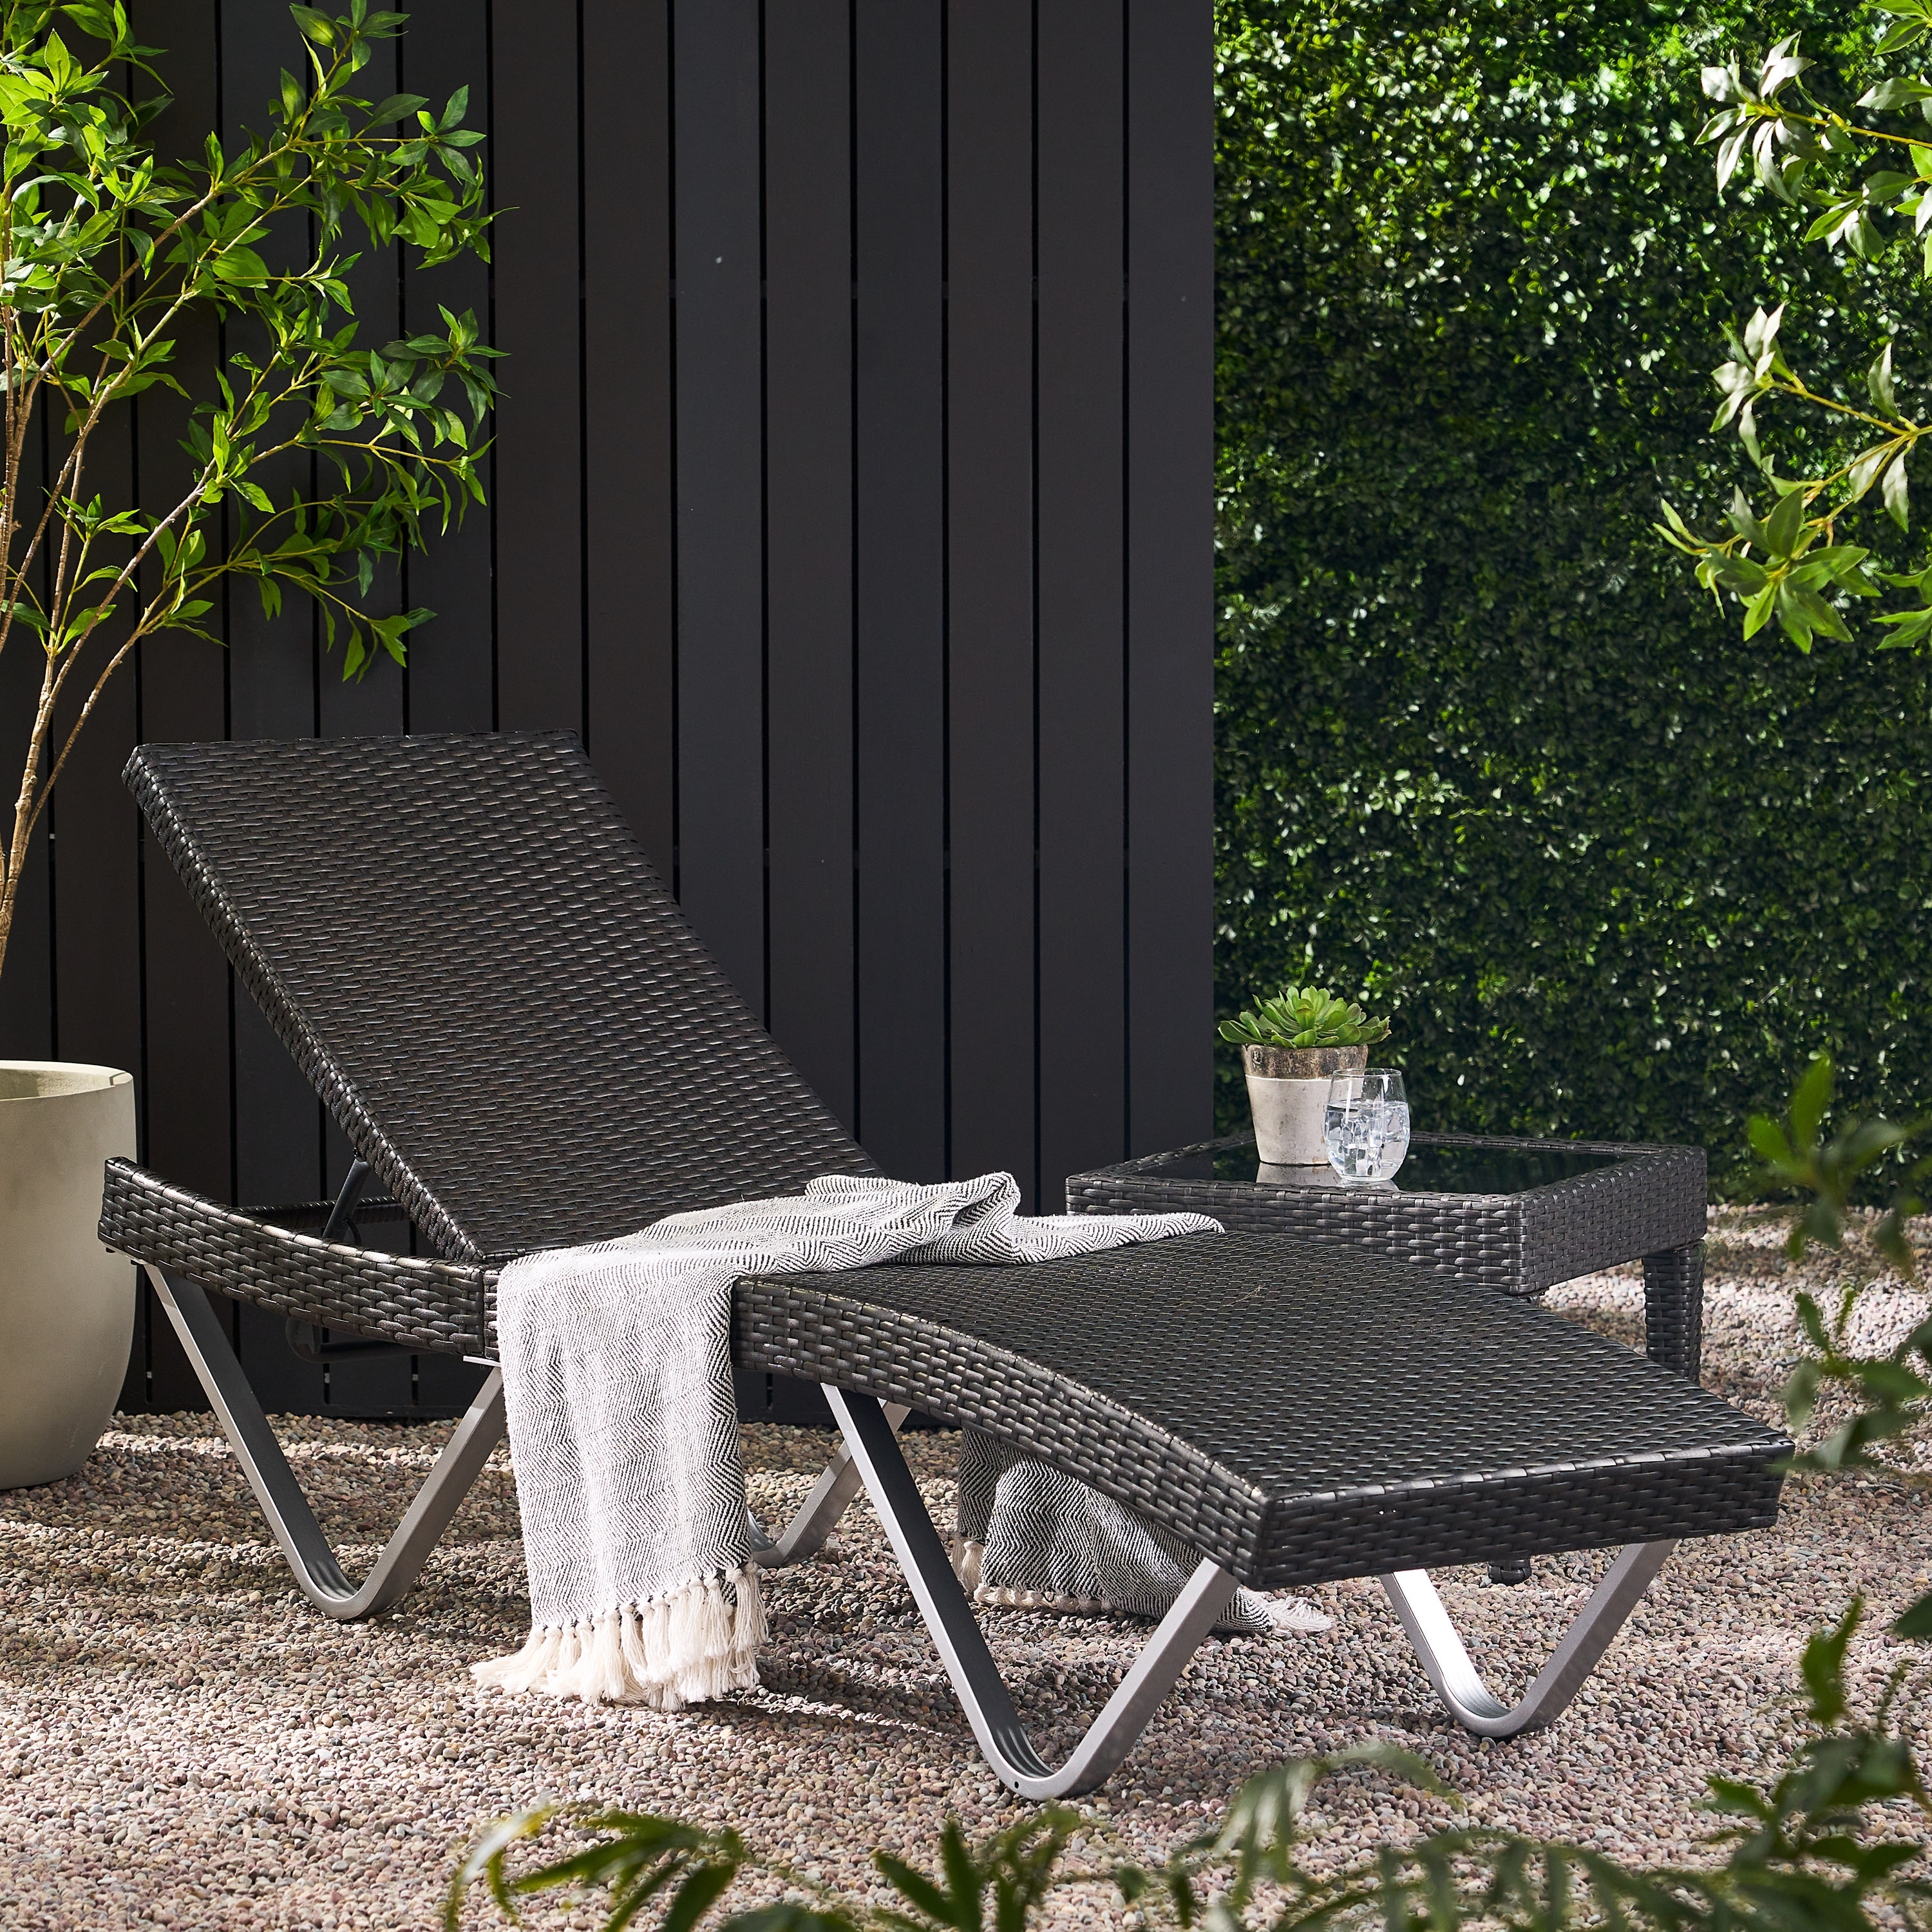 San Marco Outdoor Wicker Chaise Lounge By Christopher Knight Home